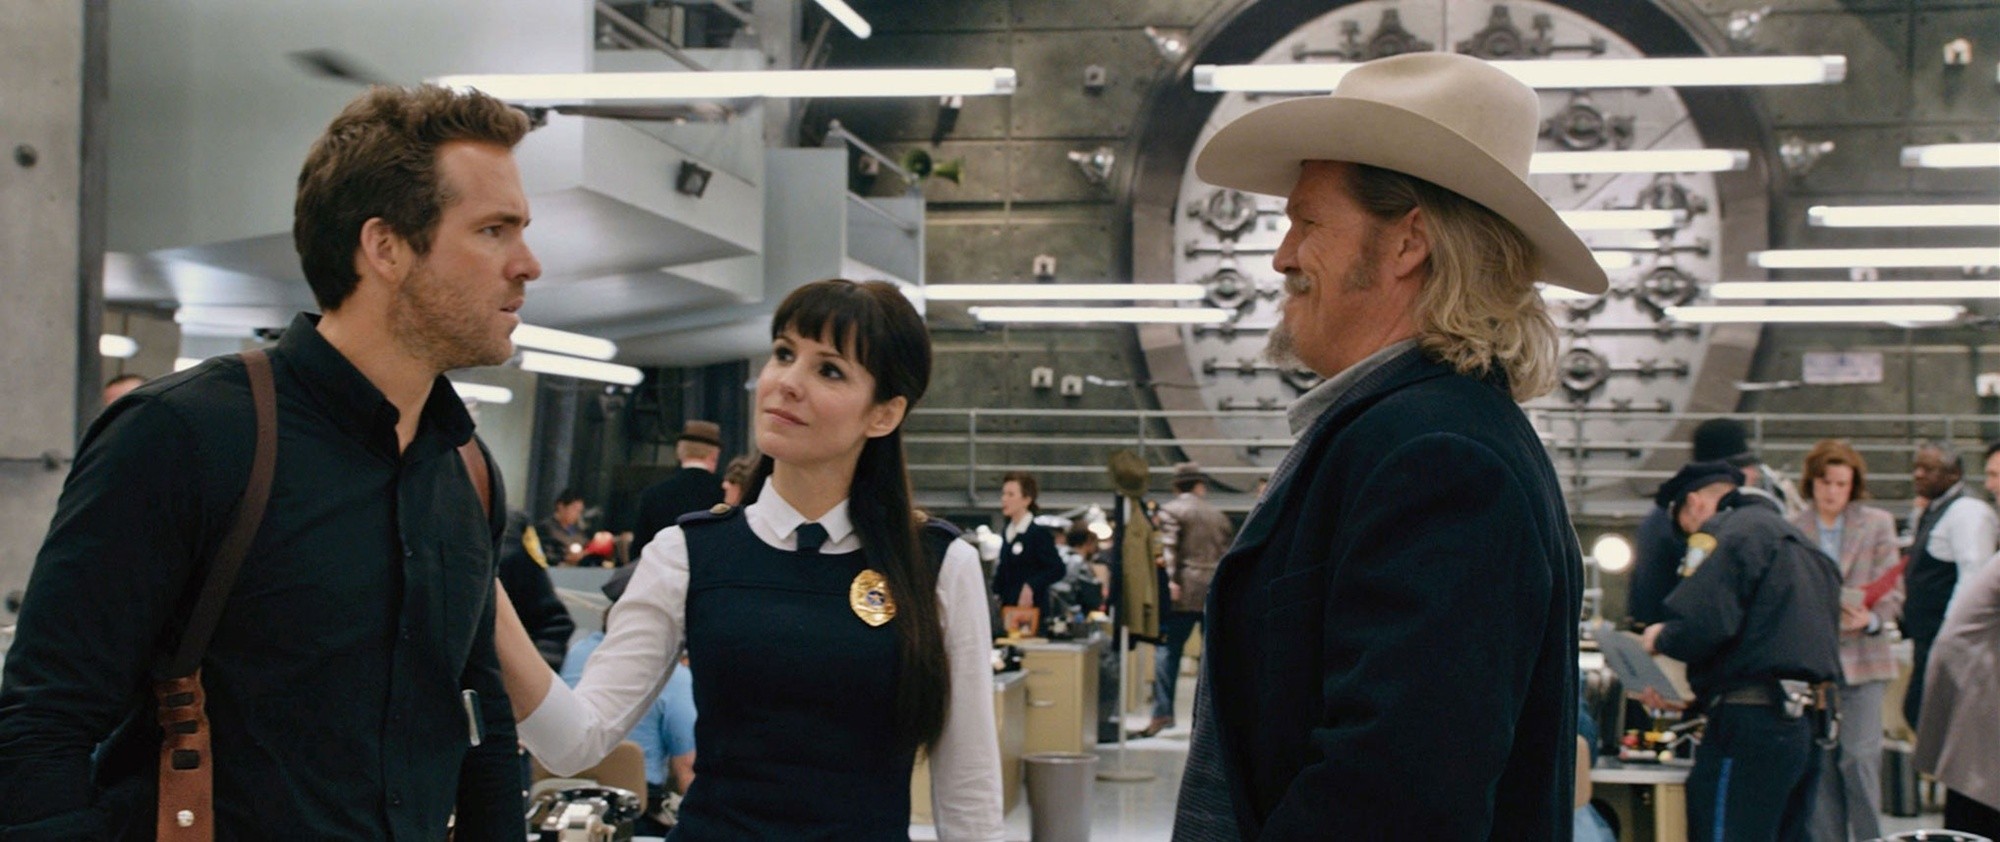 Ryan Reynolds, Mary-Louise Parker and Jeff Bridges in Universal Pictures' R.I.P.D. (2013)